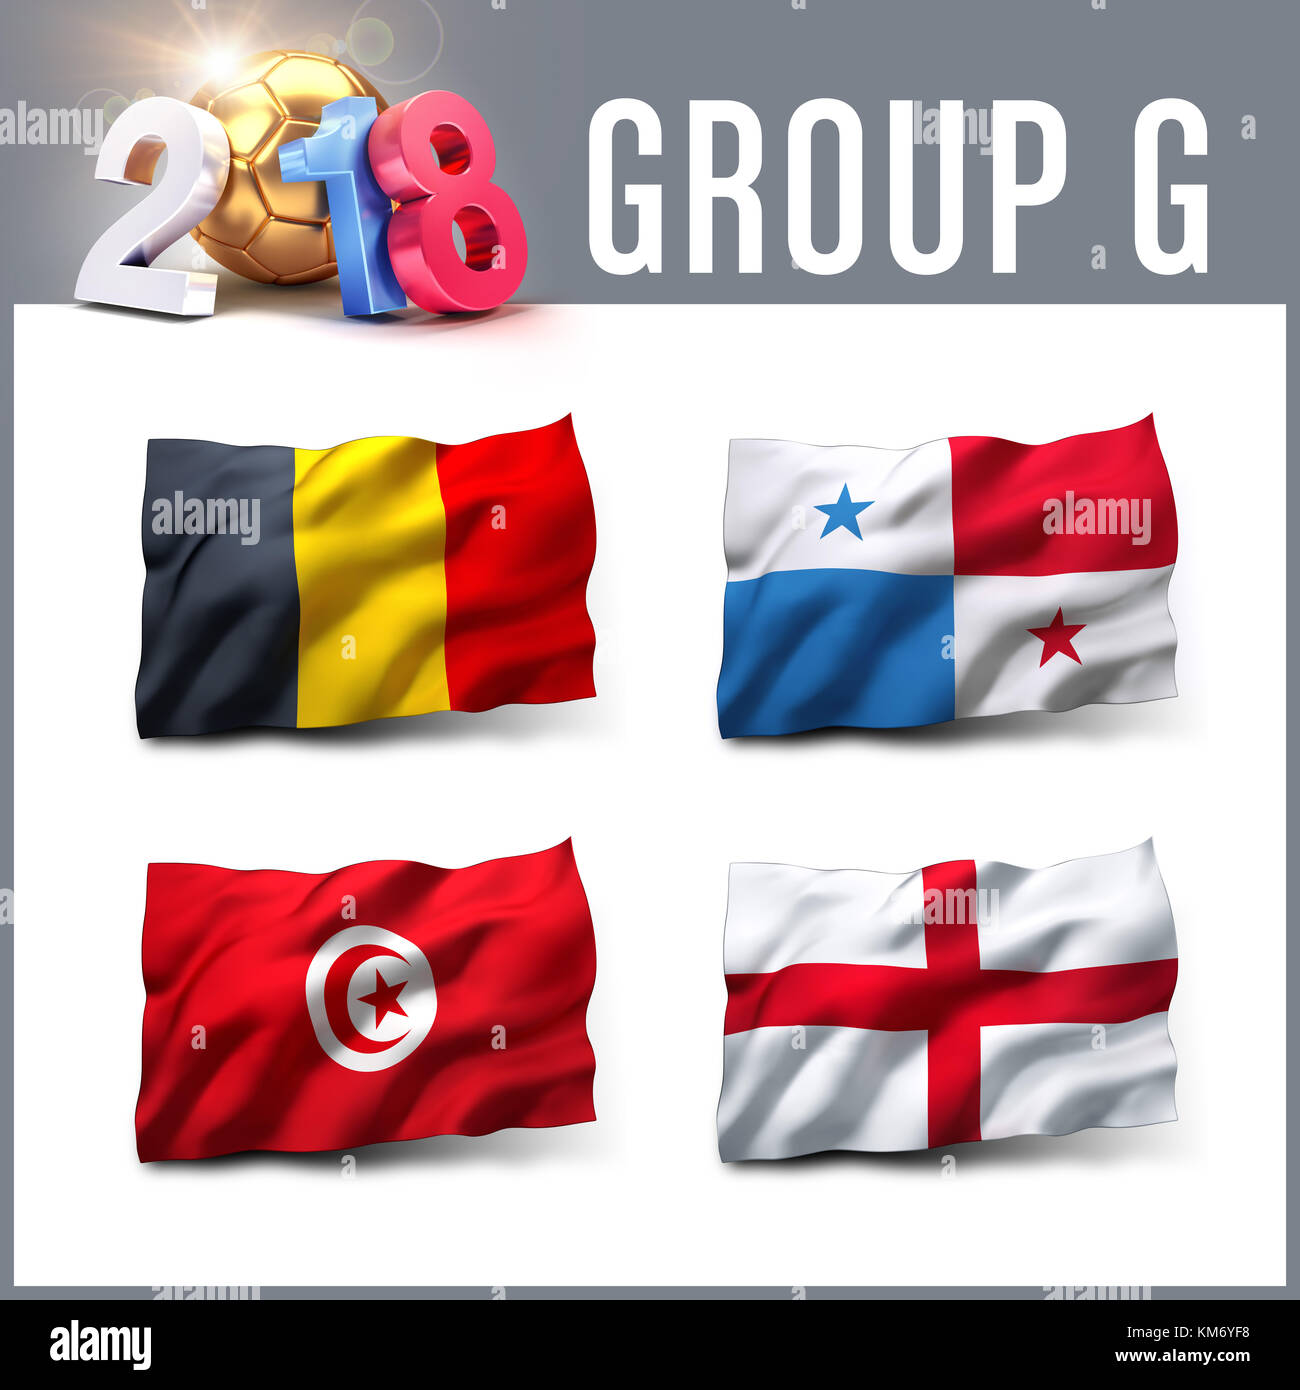 Russia 2018 qualifying group G with team flags. International soccer competition. 3D illustration. Stock Photo